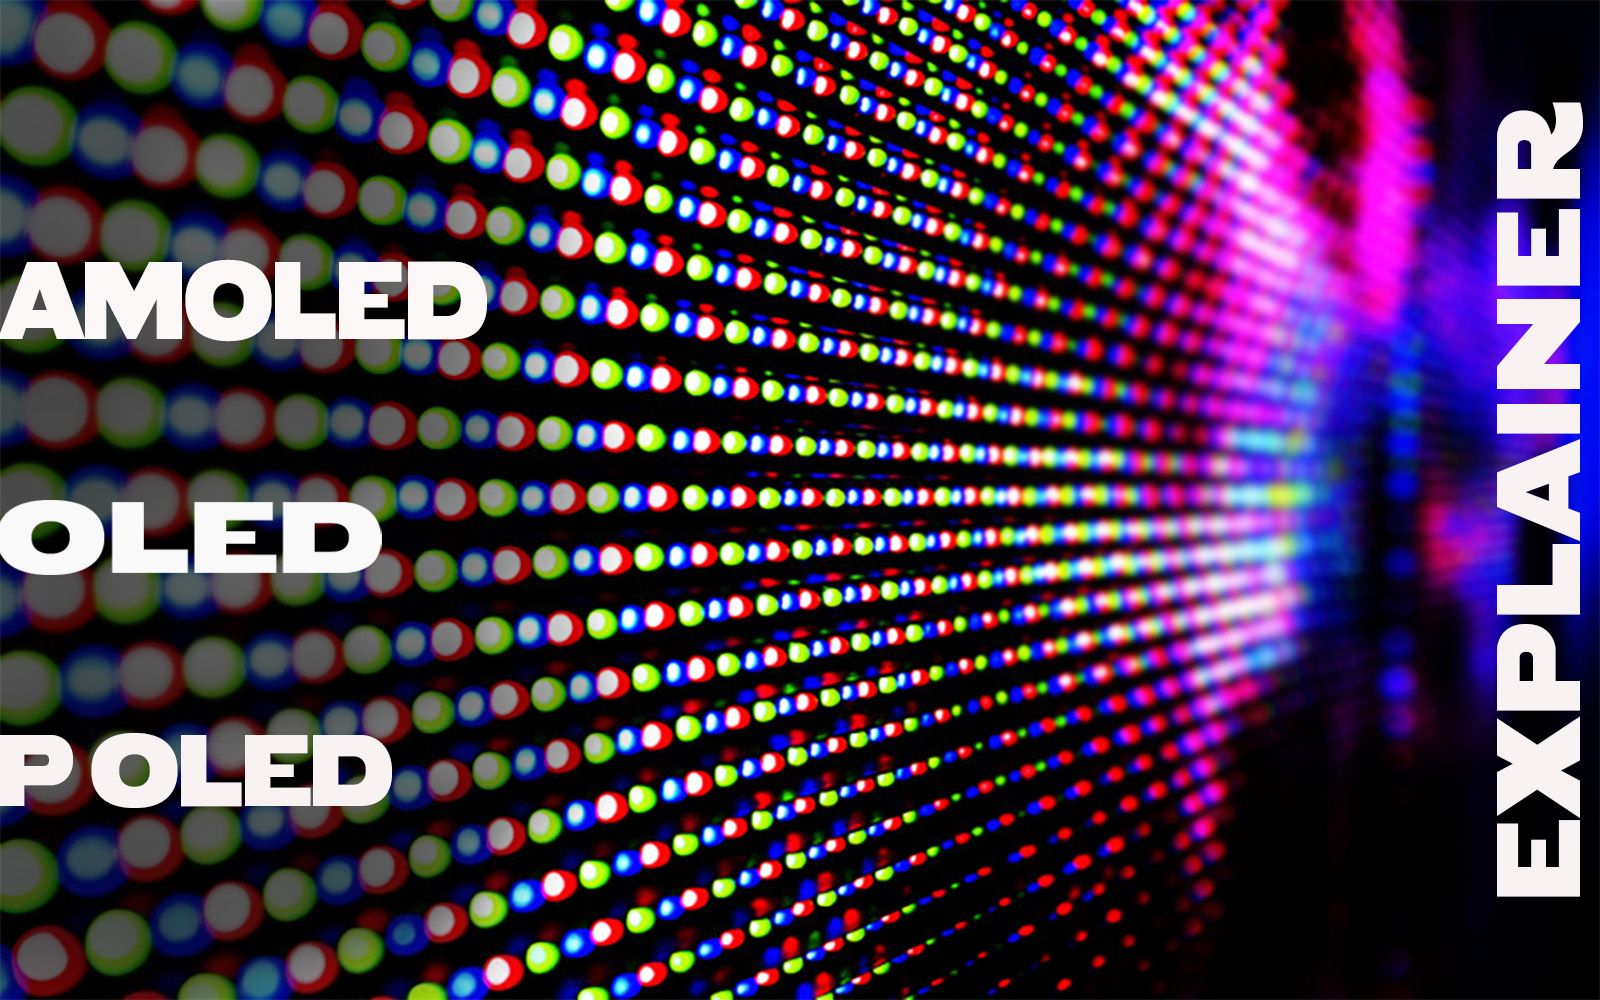 What's the difference between AMOLED, OLED, and POLED